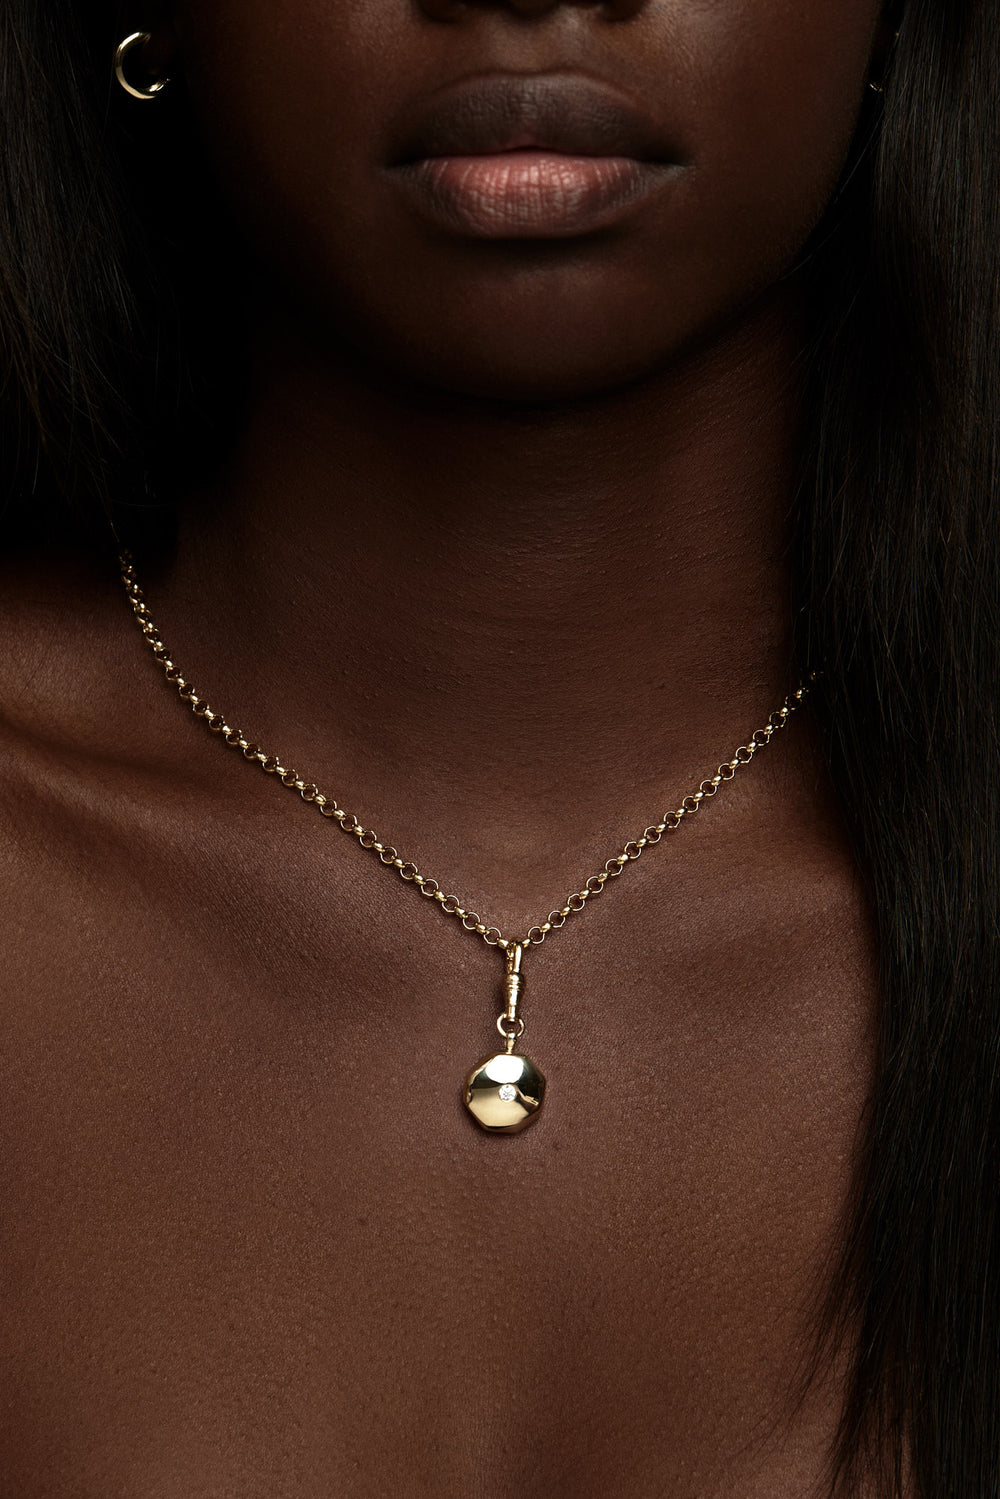 Small Chateau Necklace | 9K Yellow Gold